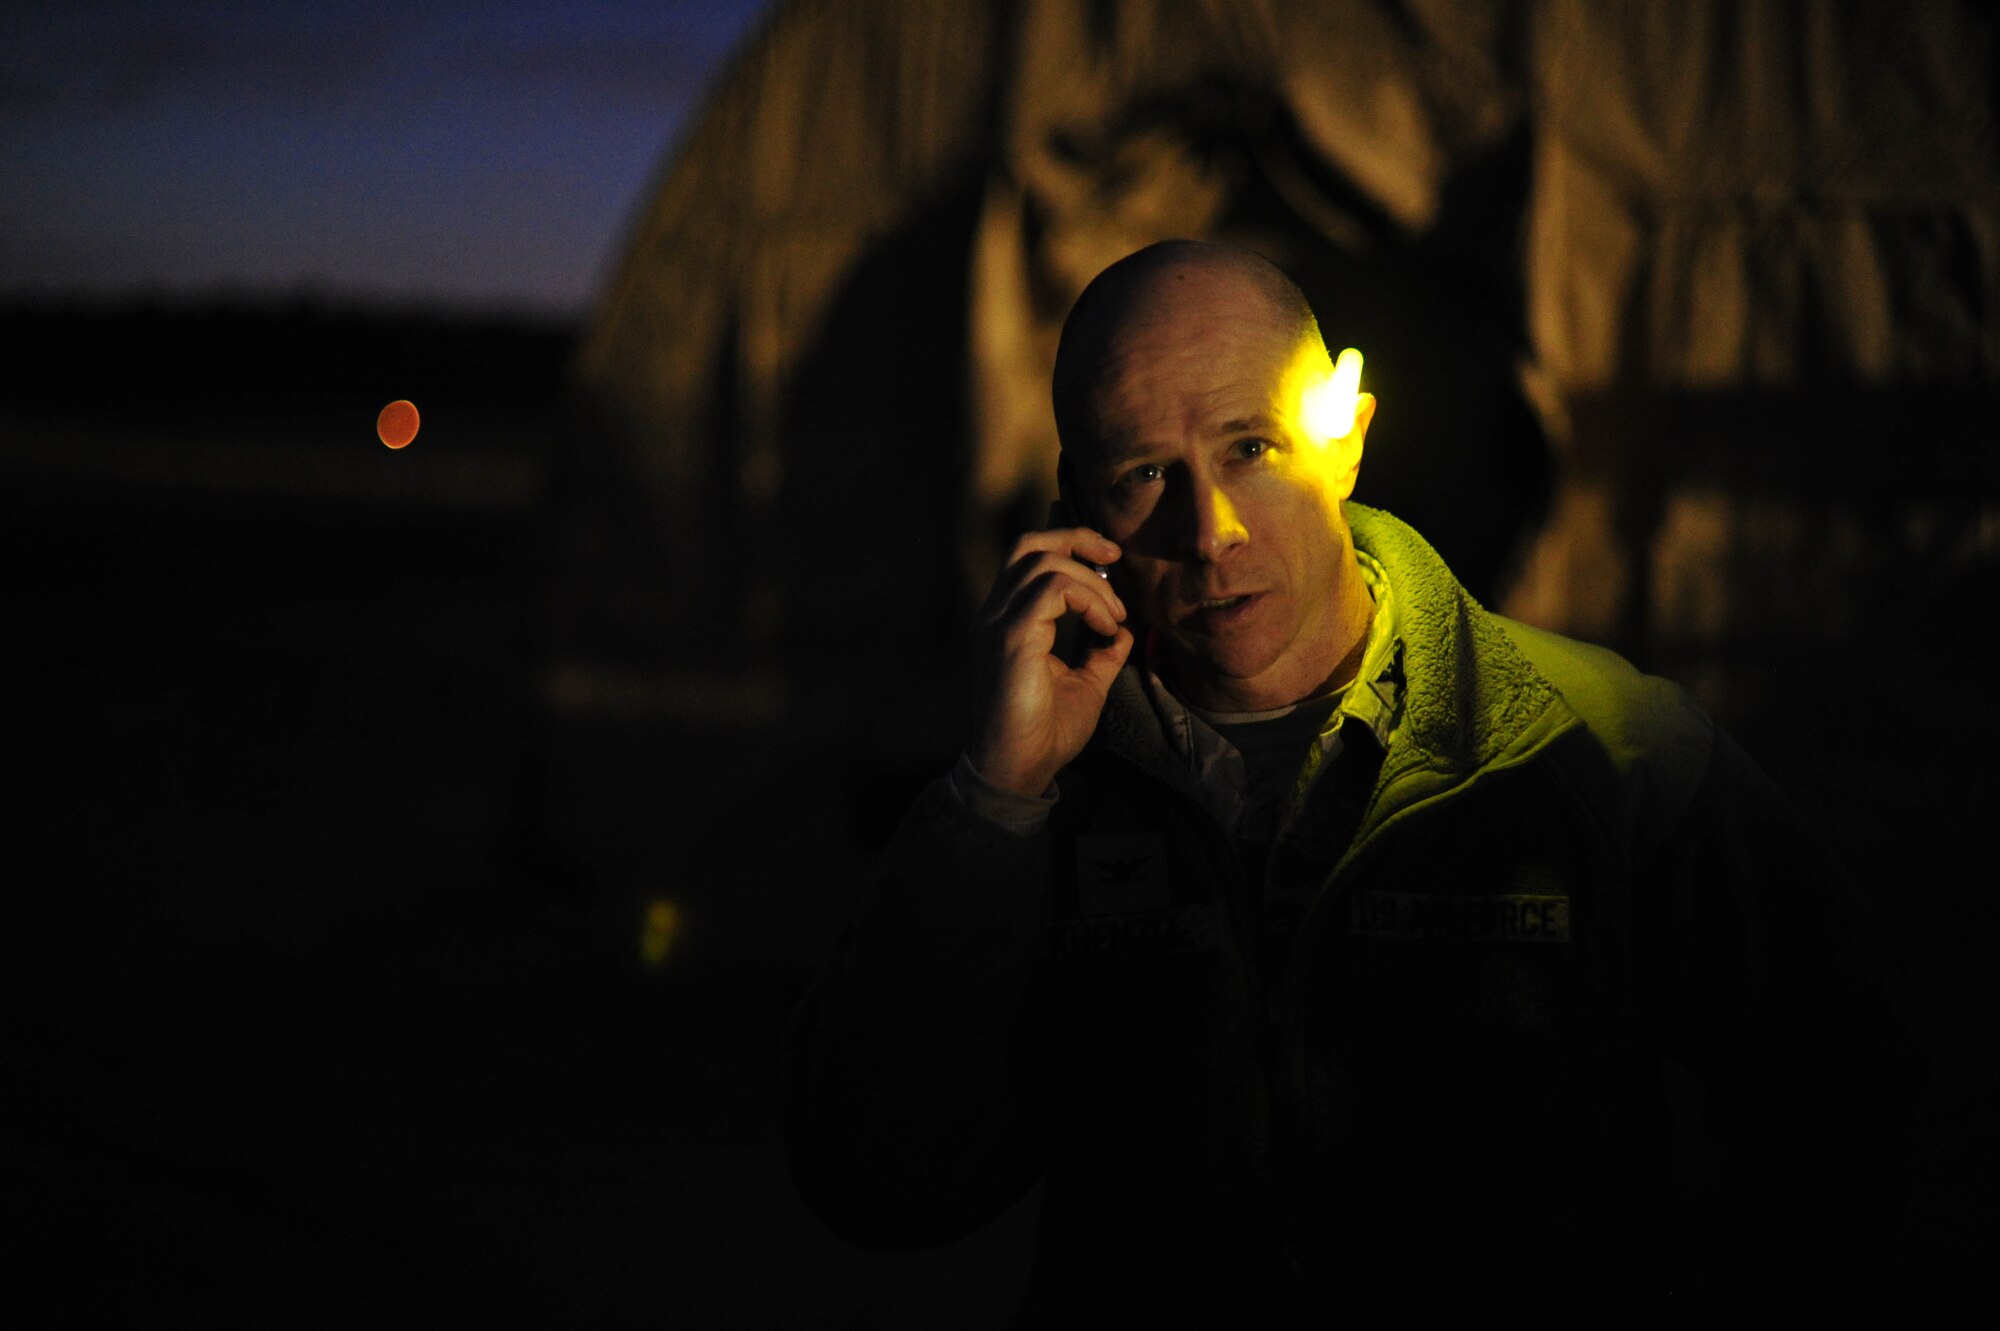 JOINT BASE MCGUIRE-DIX-LAKEHURST, N.J. -- U.S. Air Force Col. David Kuenzli, 817th Contingency Response Group commander, talks on a cell phone at Lakehurst during U.S. Transportation Command Joint Task Force Validation exercise Eagle Flag 13-2 March 19, 2013. Kuenzli, 100 Airmen from the 817 CRG and 50 U.S. Army Soldiers from the 690th Rapid Port Element, based at Joint Base Langley-Eustis, Va., were simulating the establishment of an aerial port of debarkation in a fictional country. (U.S. Air Force photo by Tech. Sgt. Parker Gyokeres/Released)